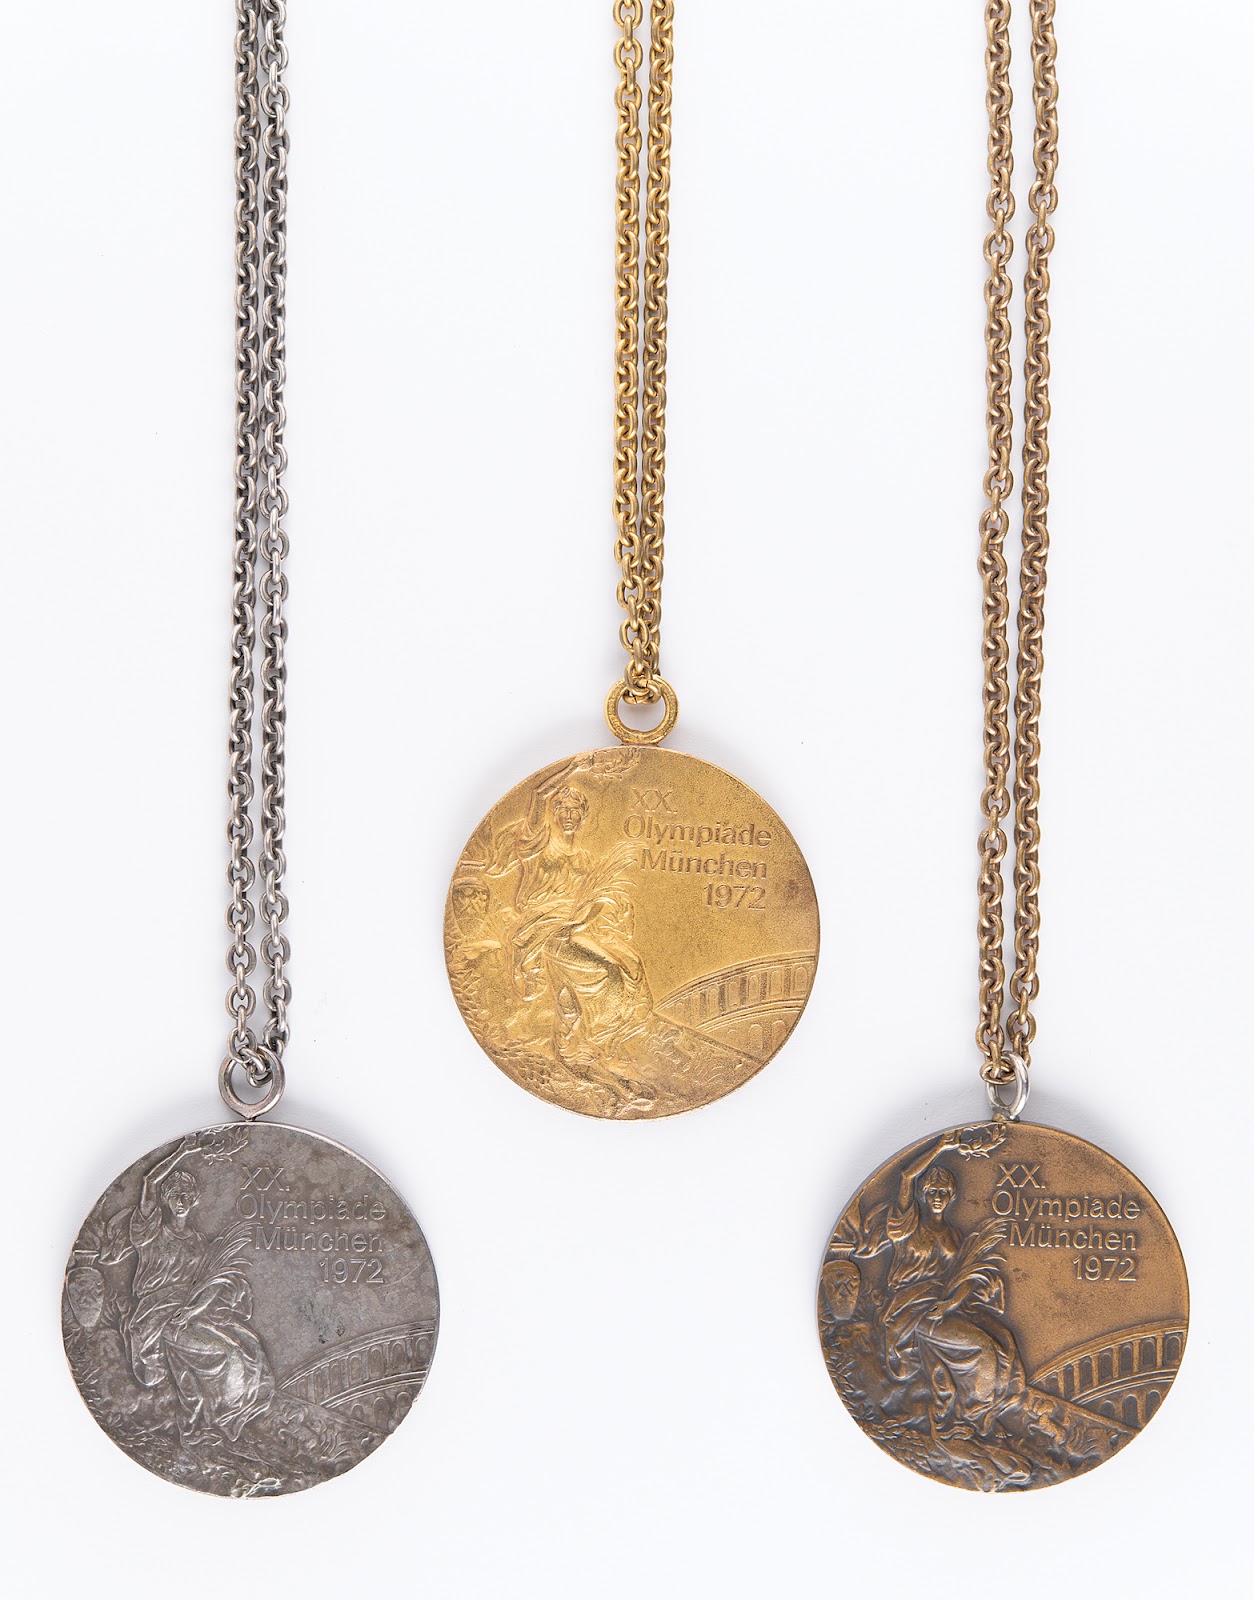 Genter’s trinity of gold, silver, and bronze medals earned during the Munich 1972 Olympics Games, his first and final Olympiad.